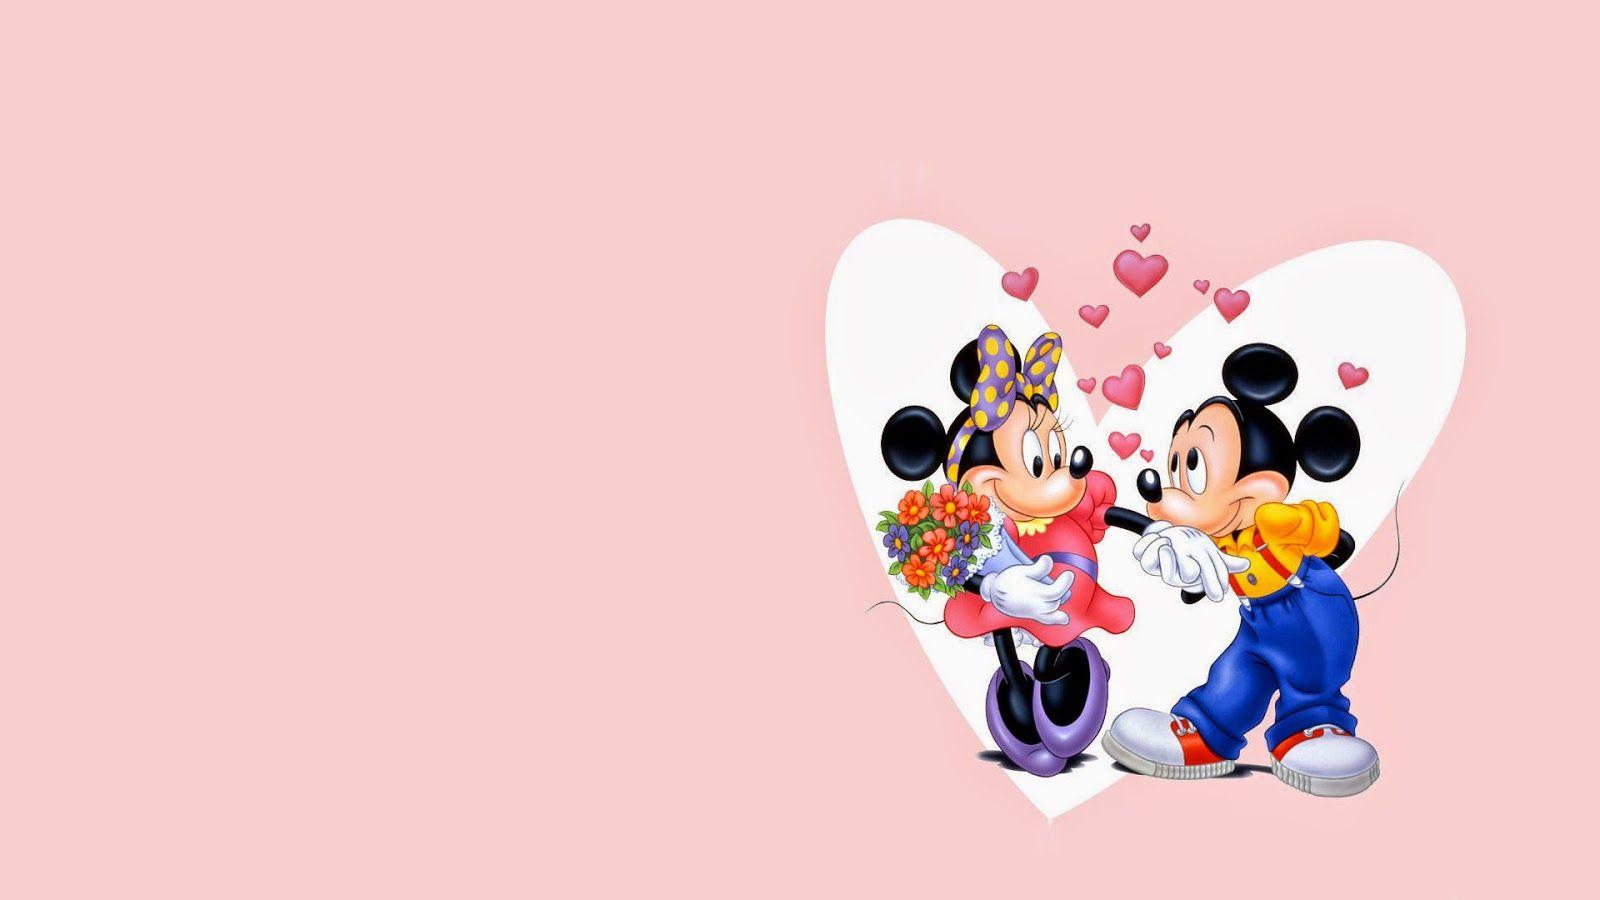 ImagesList.com: Mickey Mouse Wallpaper, part 3